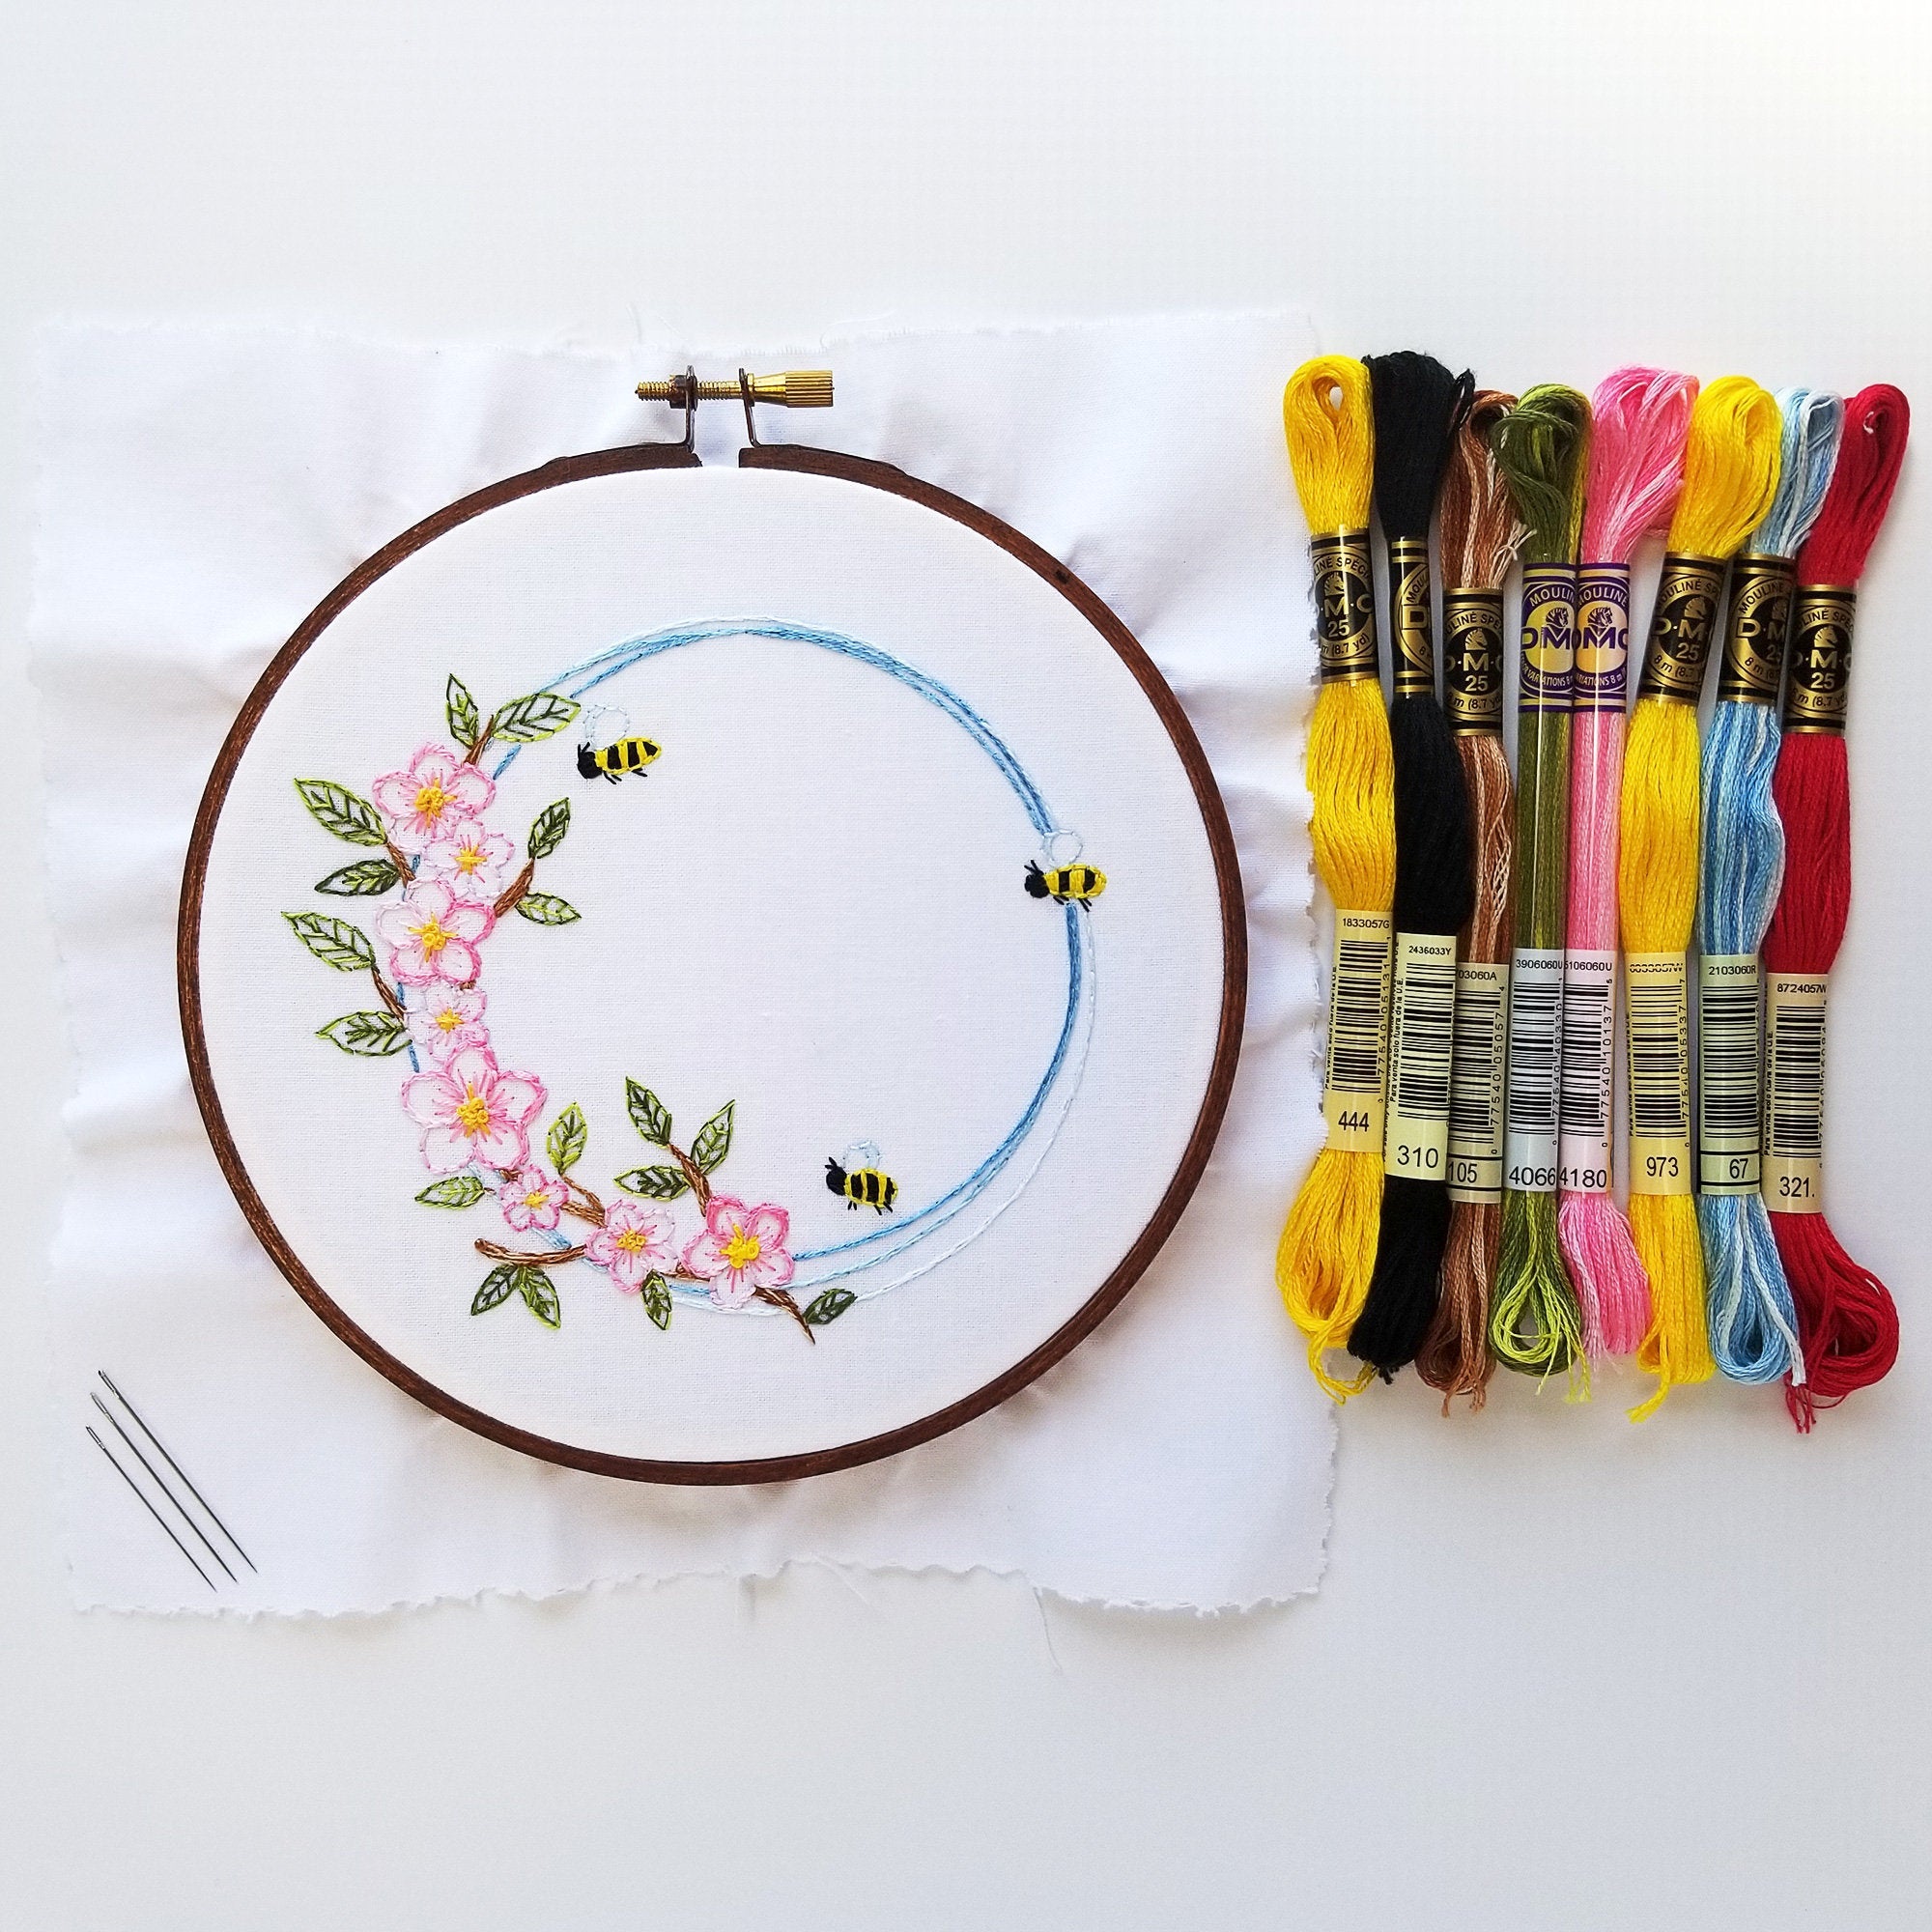 Kit - Apple Blossoms & Honey Bees Hand Embroidery Kit - Beginner Embroidery Kit with Printed Fabric